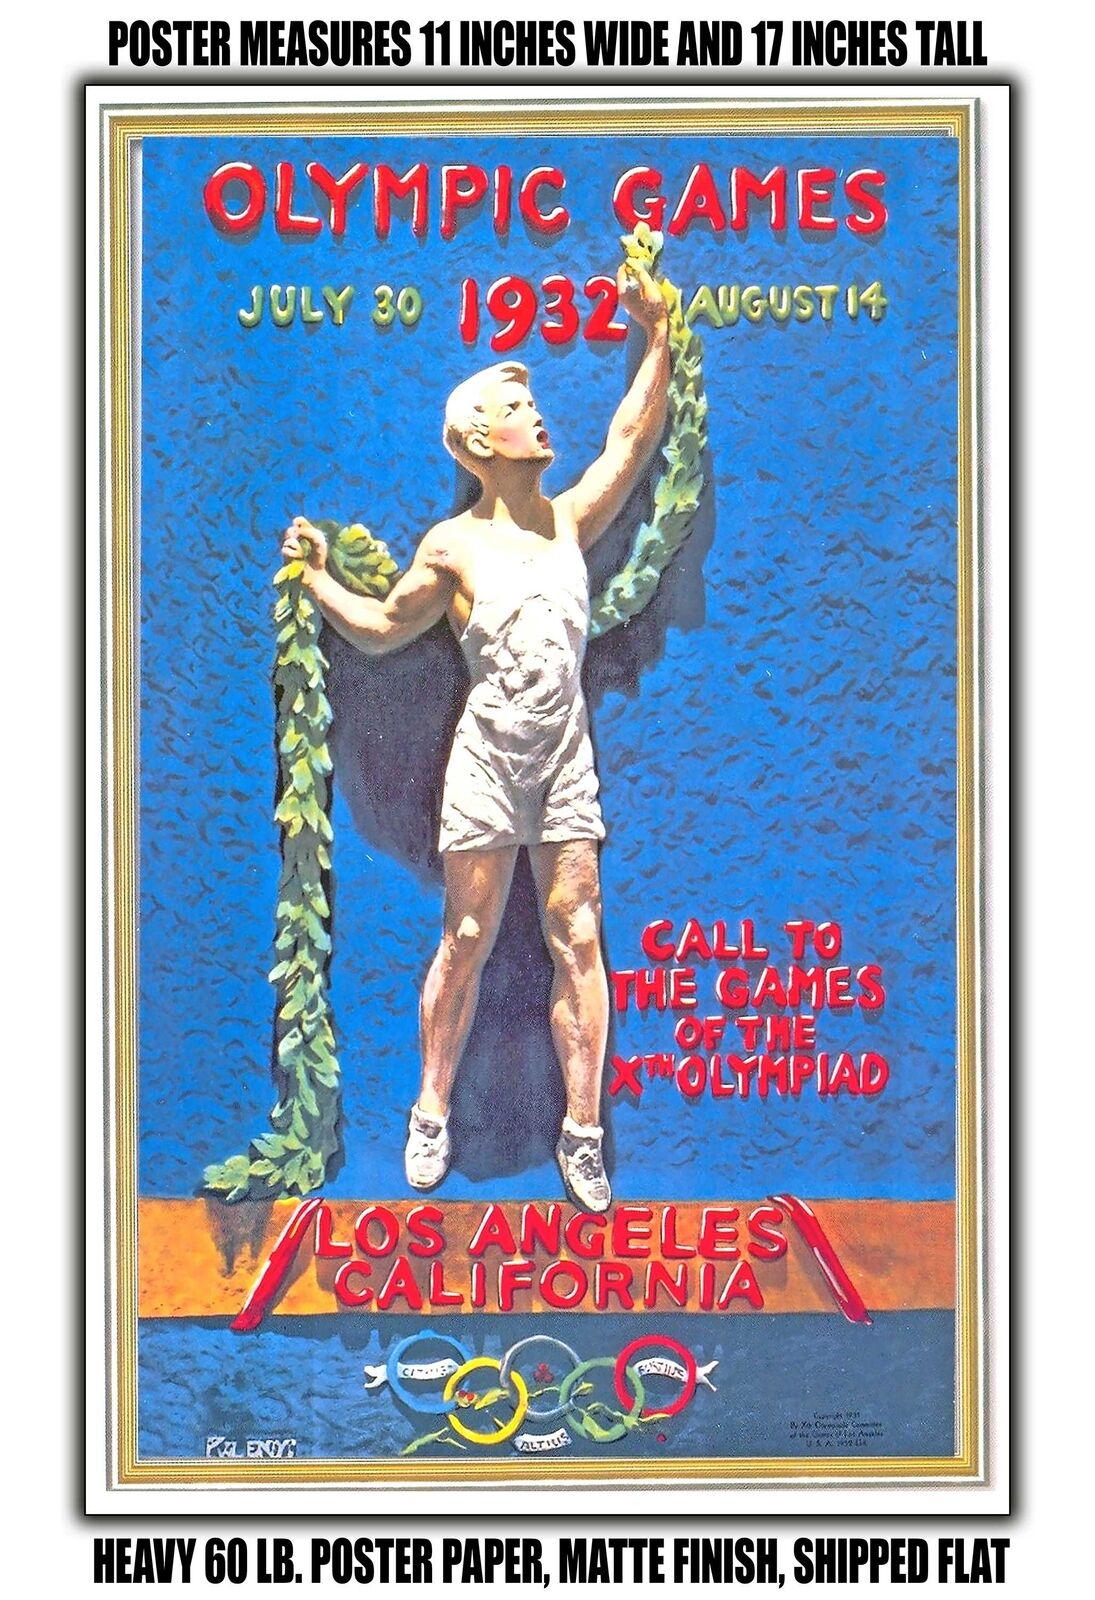 11x17 POSTER - 1932 Olympic Games Los Angeles California